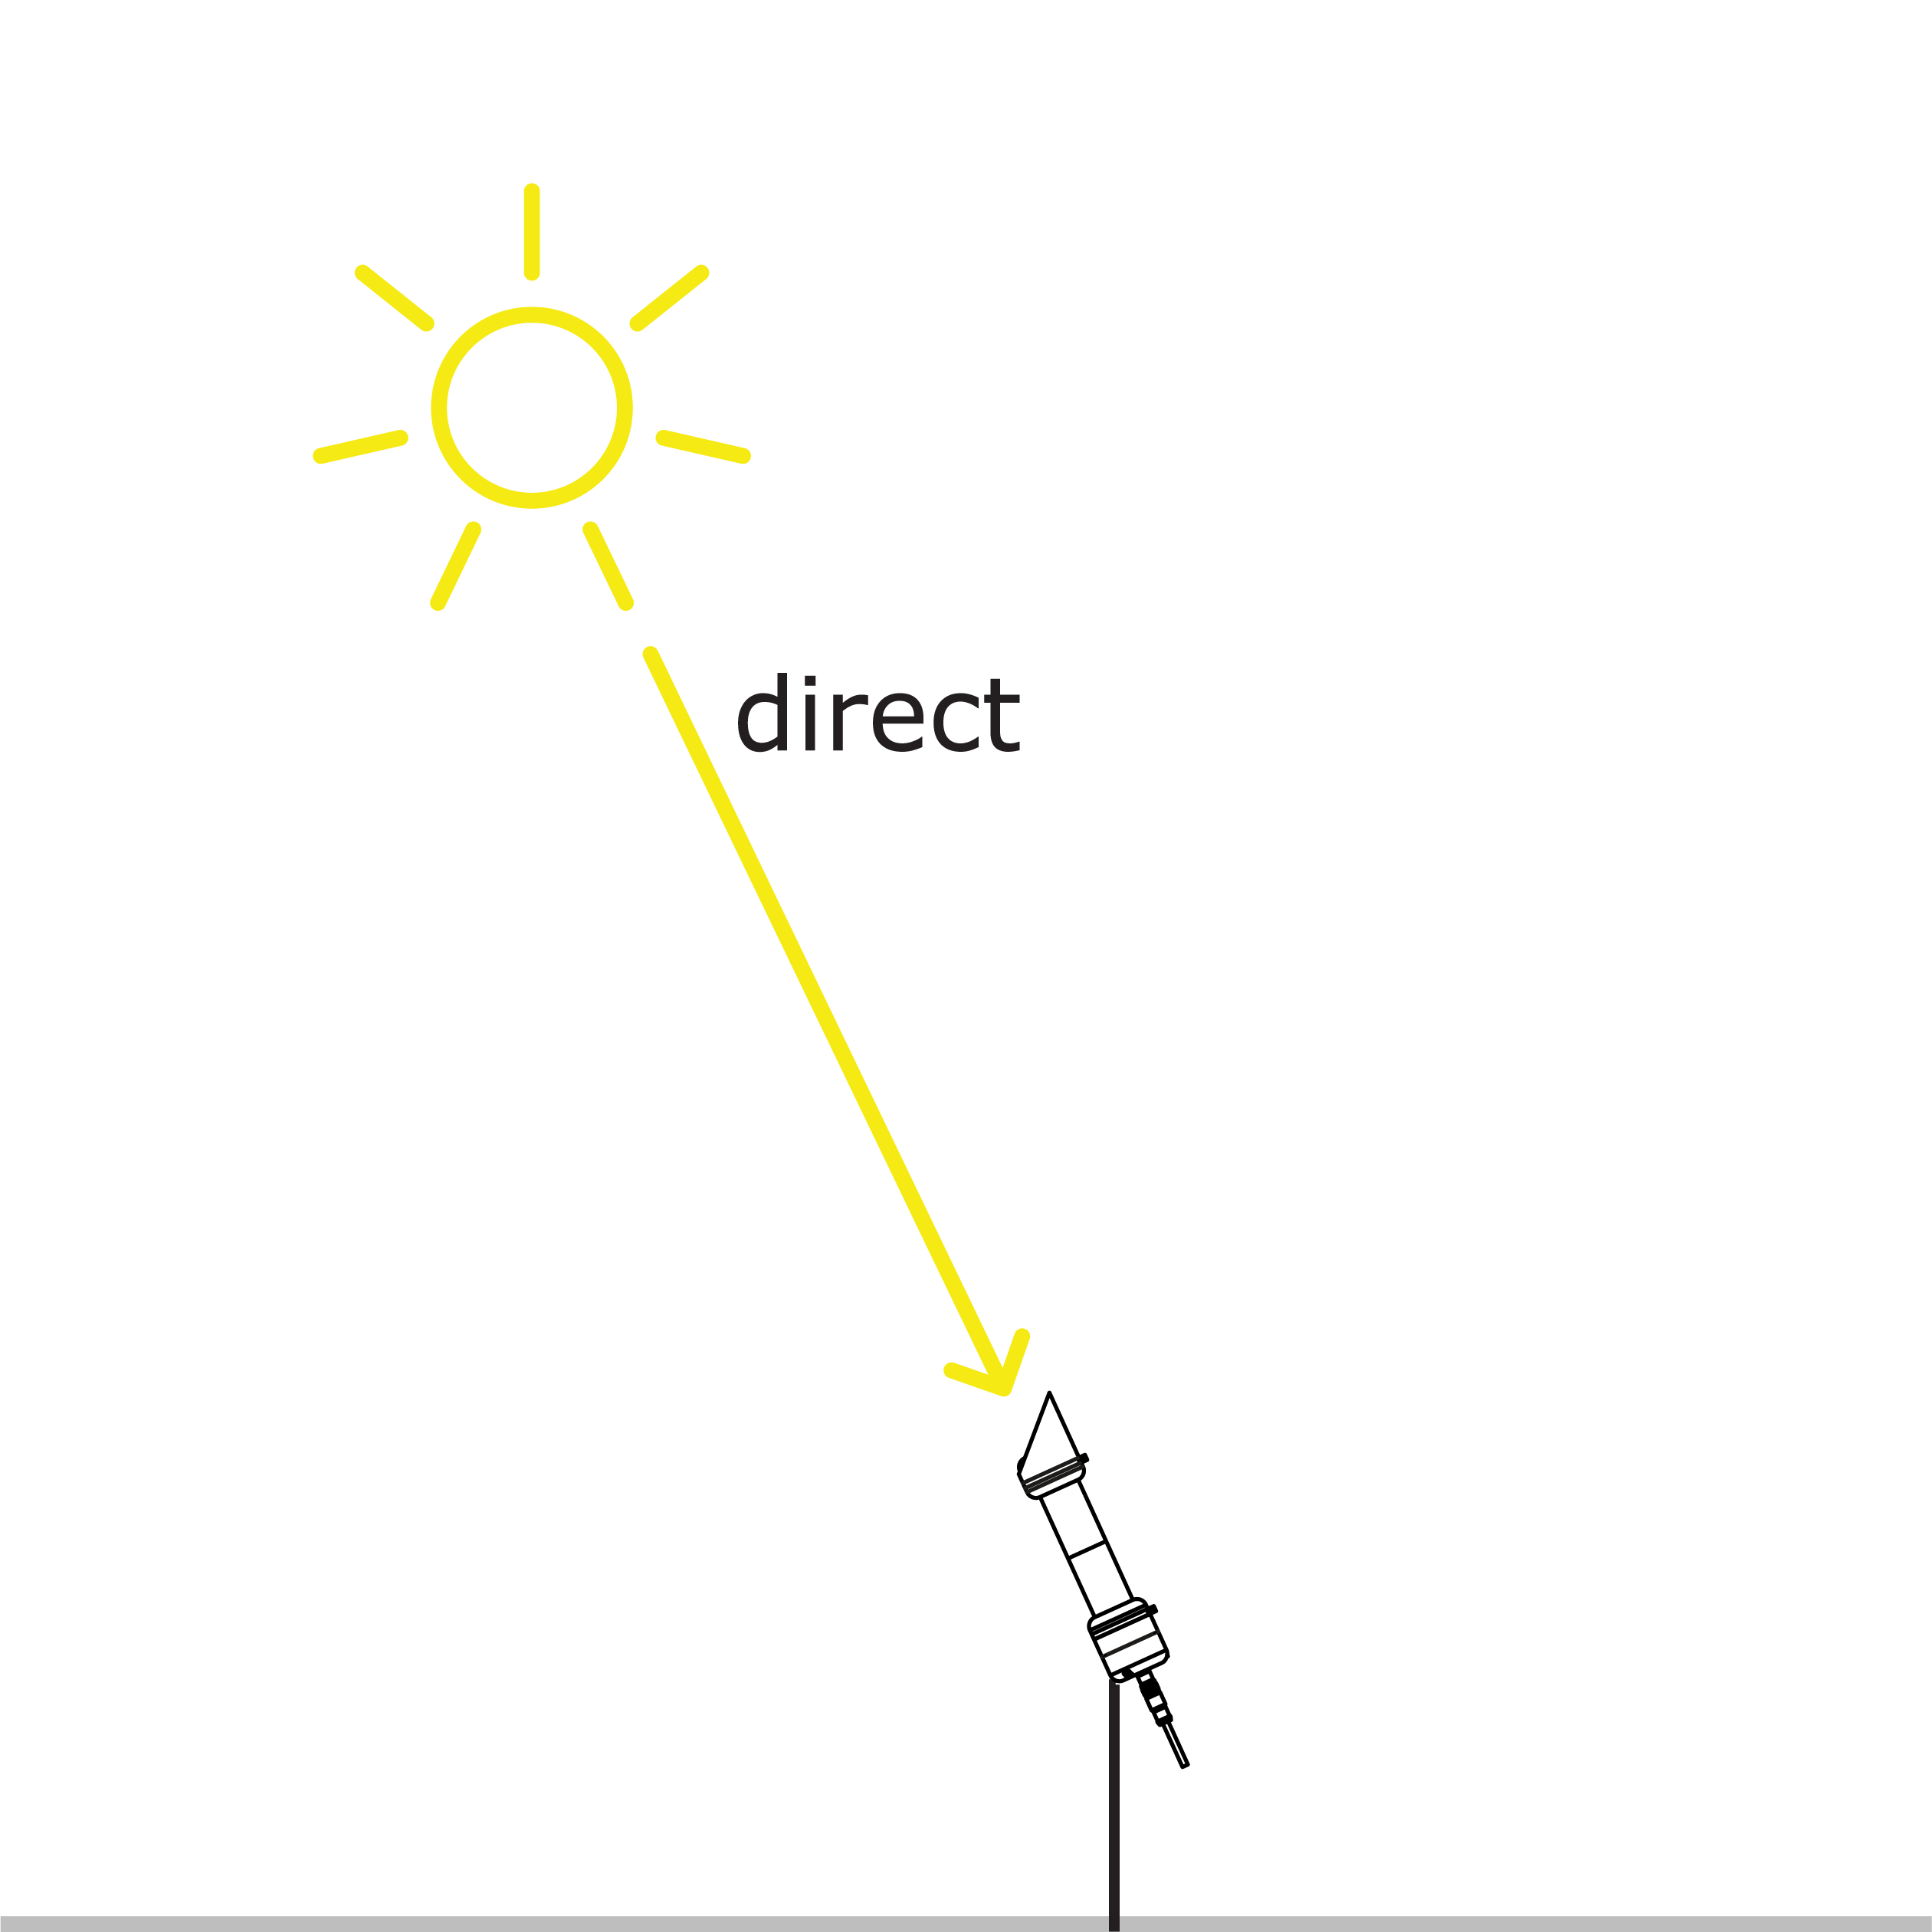 Direct irradiance, measured by a pyrheliometer